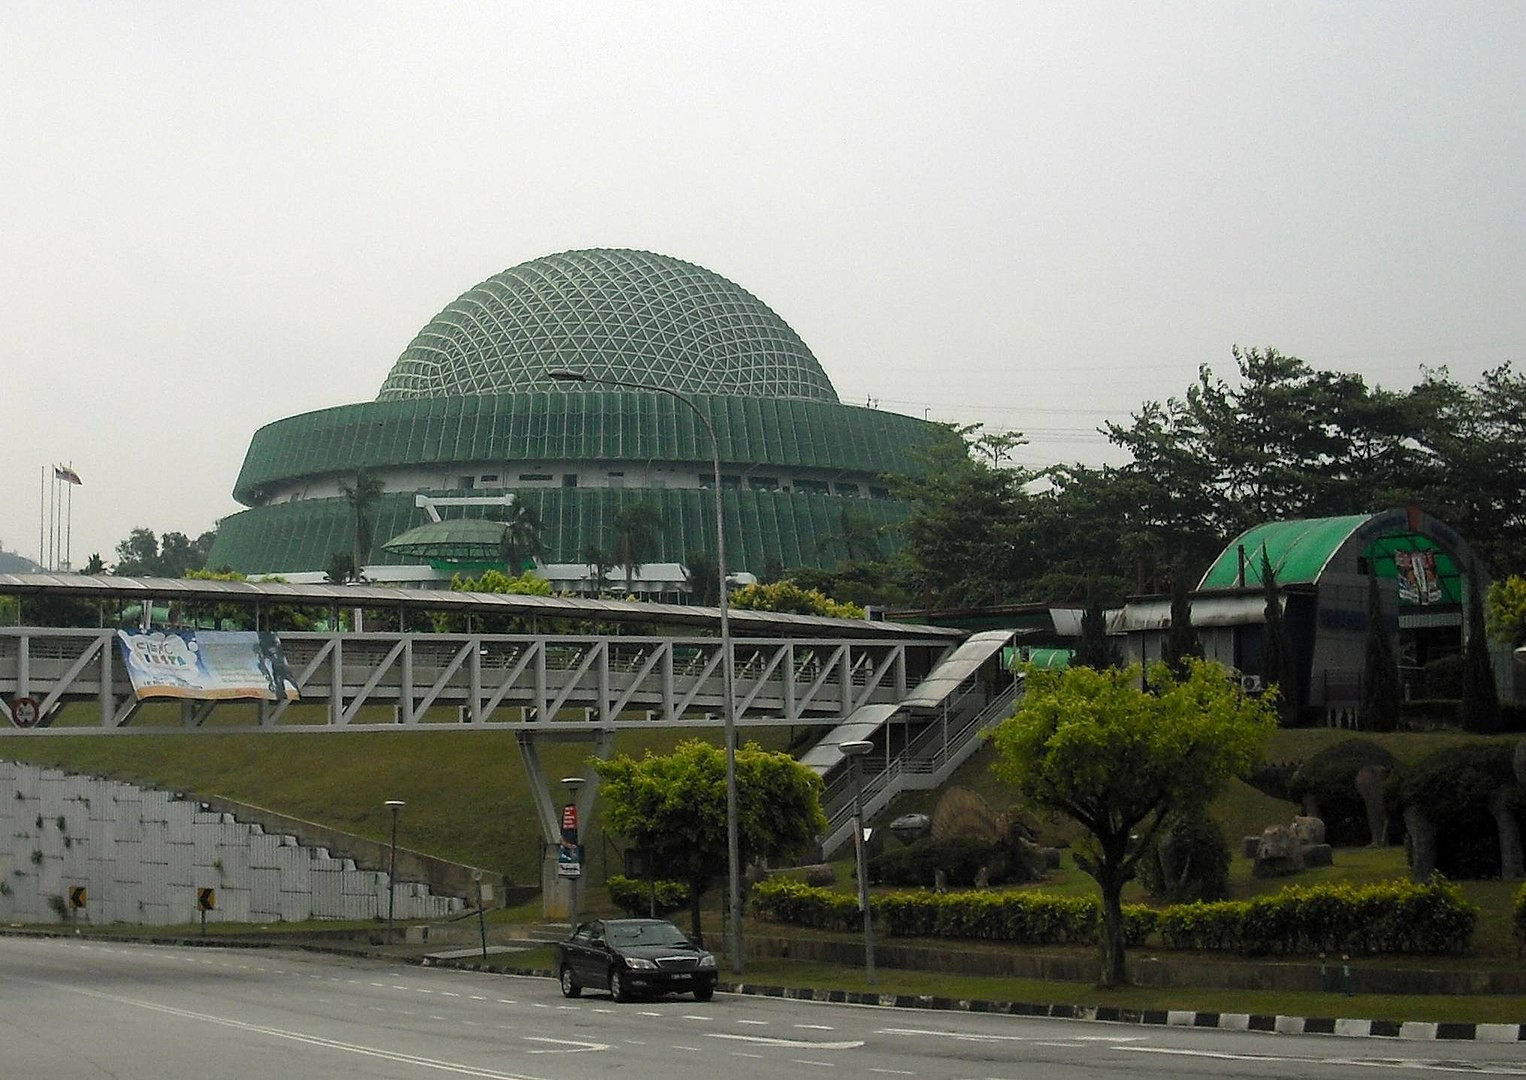 By Auswandern Malaysia - Flickr: Science Centre Kuala Lumpur, Malaysia, CC BY 2.0, https://commons.wikimedia.org/w/index.php?curid=26697134